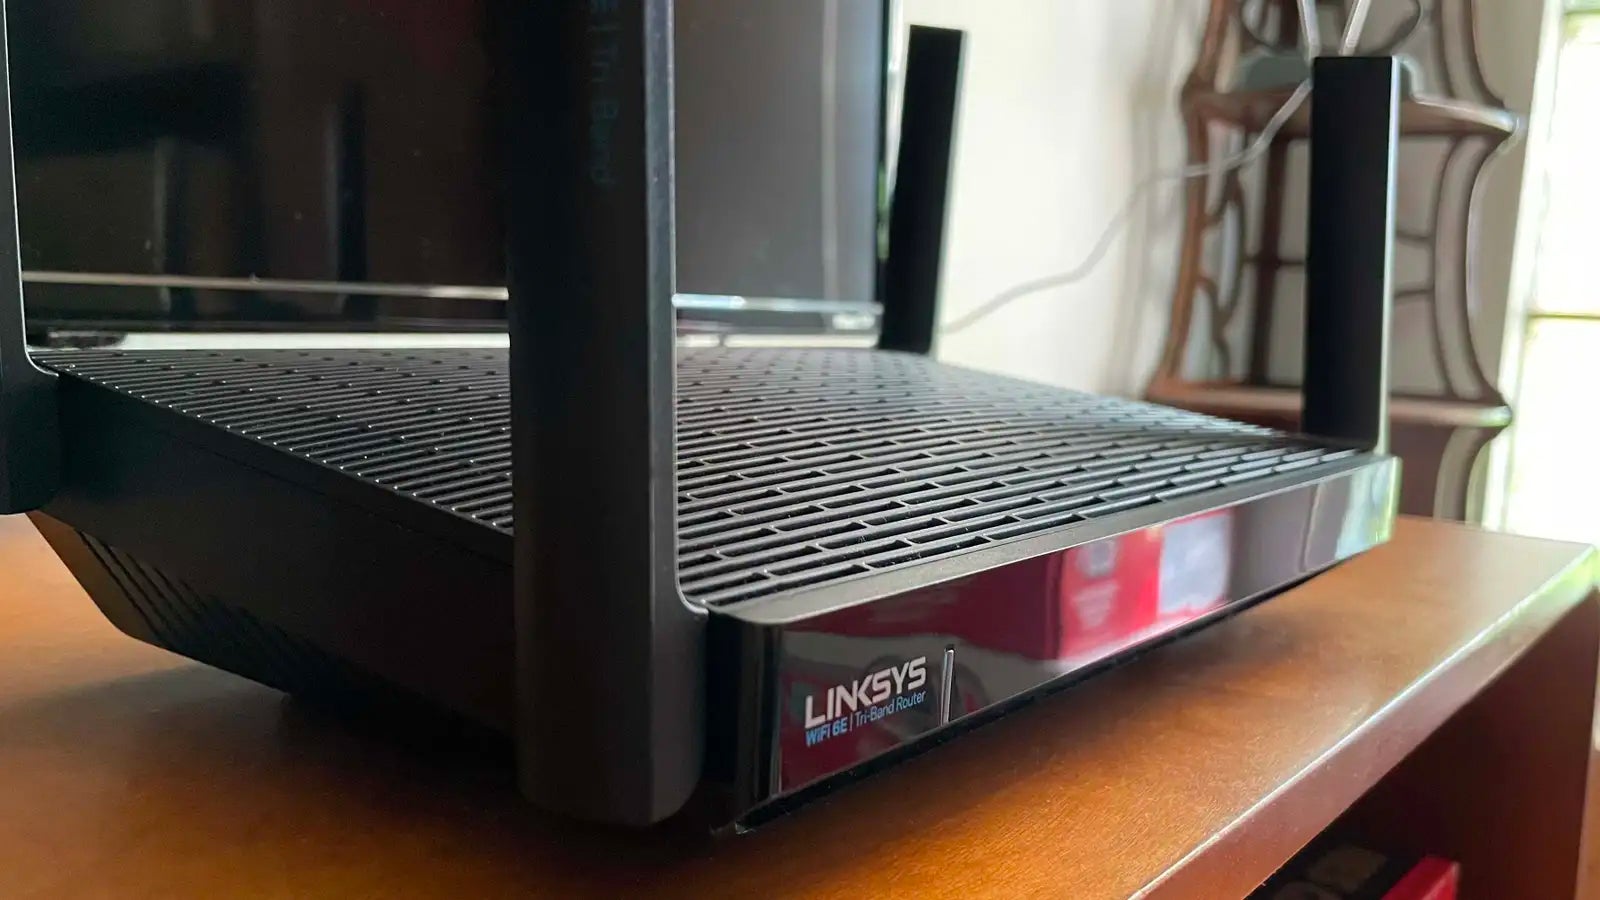 Wi-Fi 6E routers like the Linksys Hydra Pro 6E are now on the market. (Photo: Wes Davis/Gizmodo)